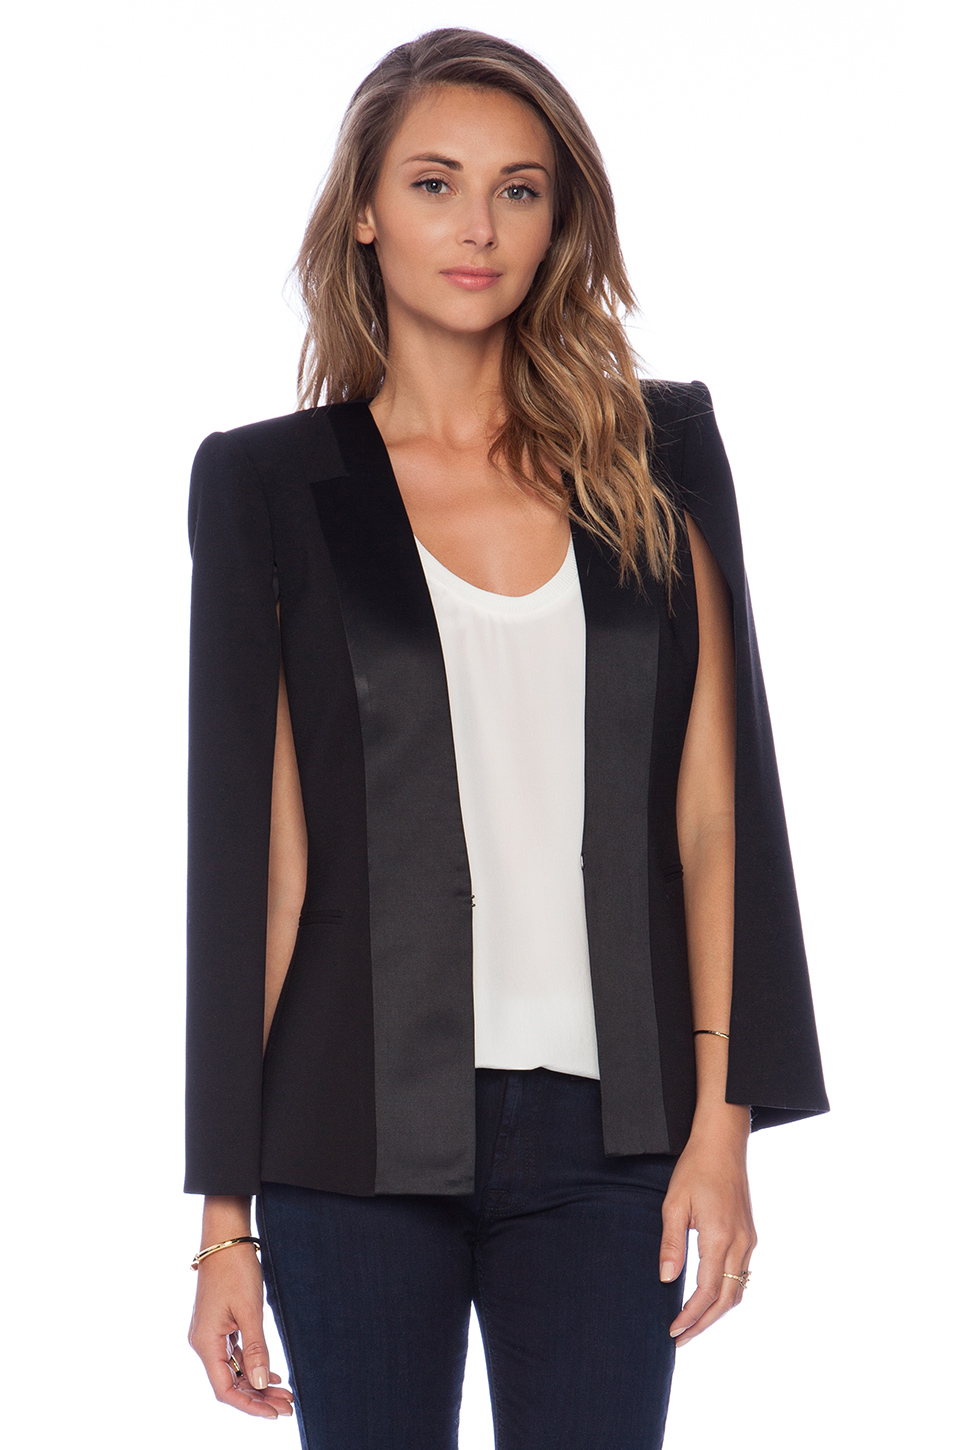 Steal His Style: EJ Johnsons Black Tuxedo Cape and 